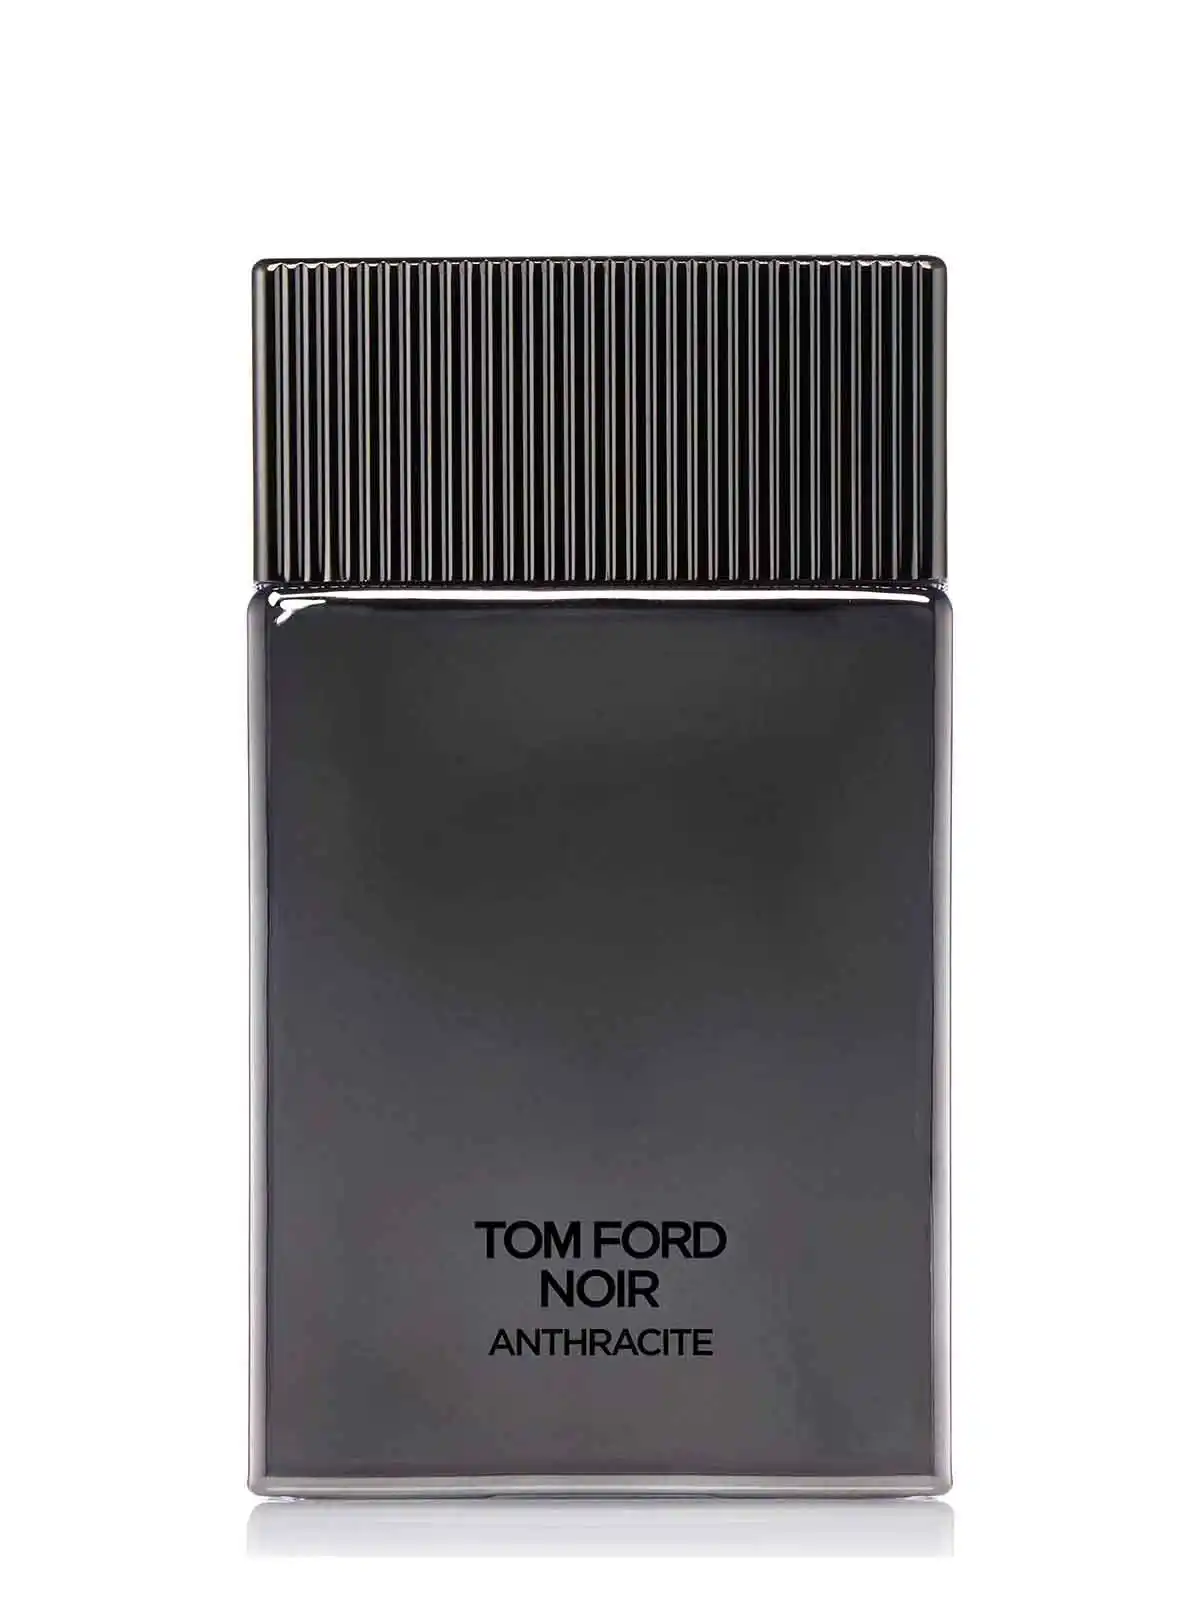 Tom Ford Noir Anthracite EDP [Unboxed] - noseunbox